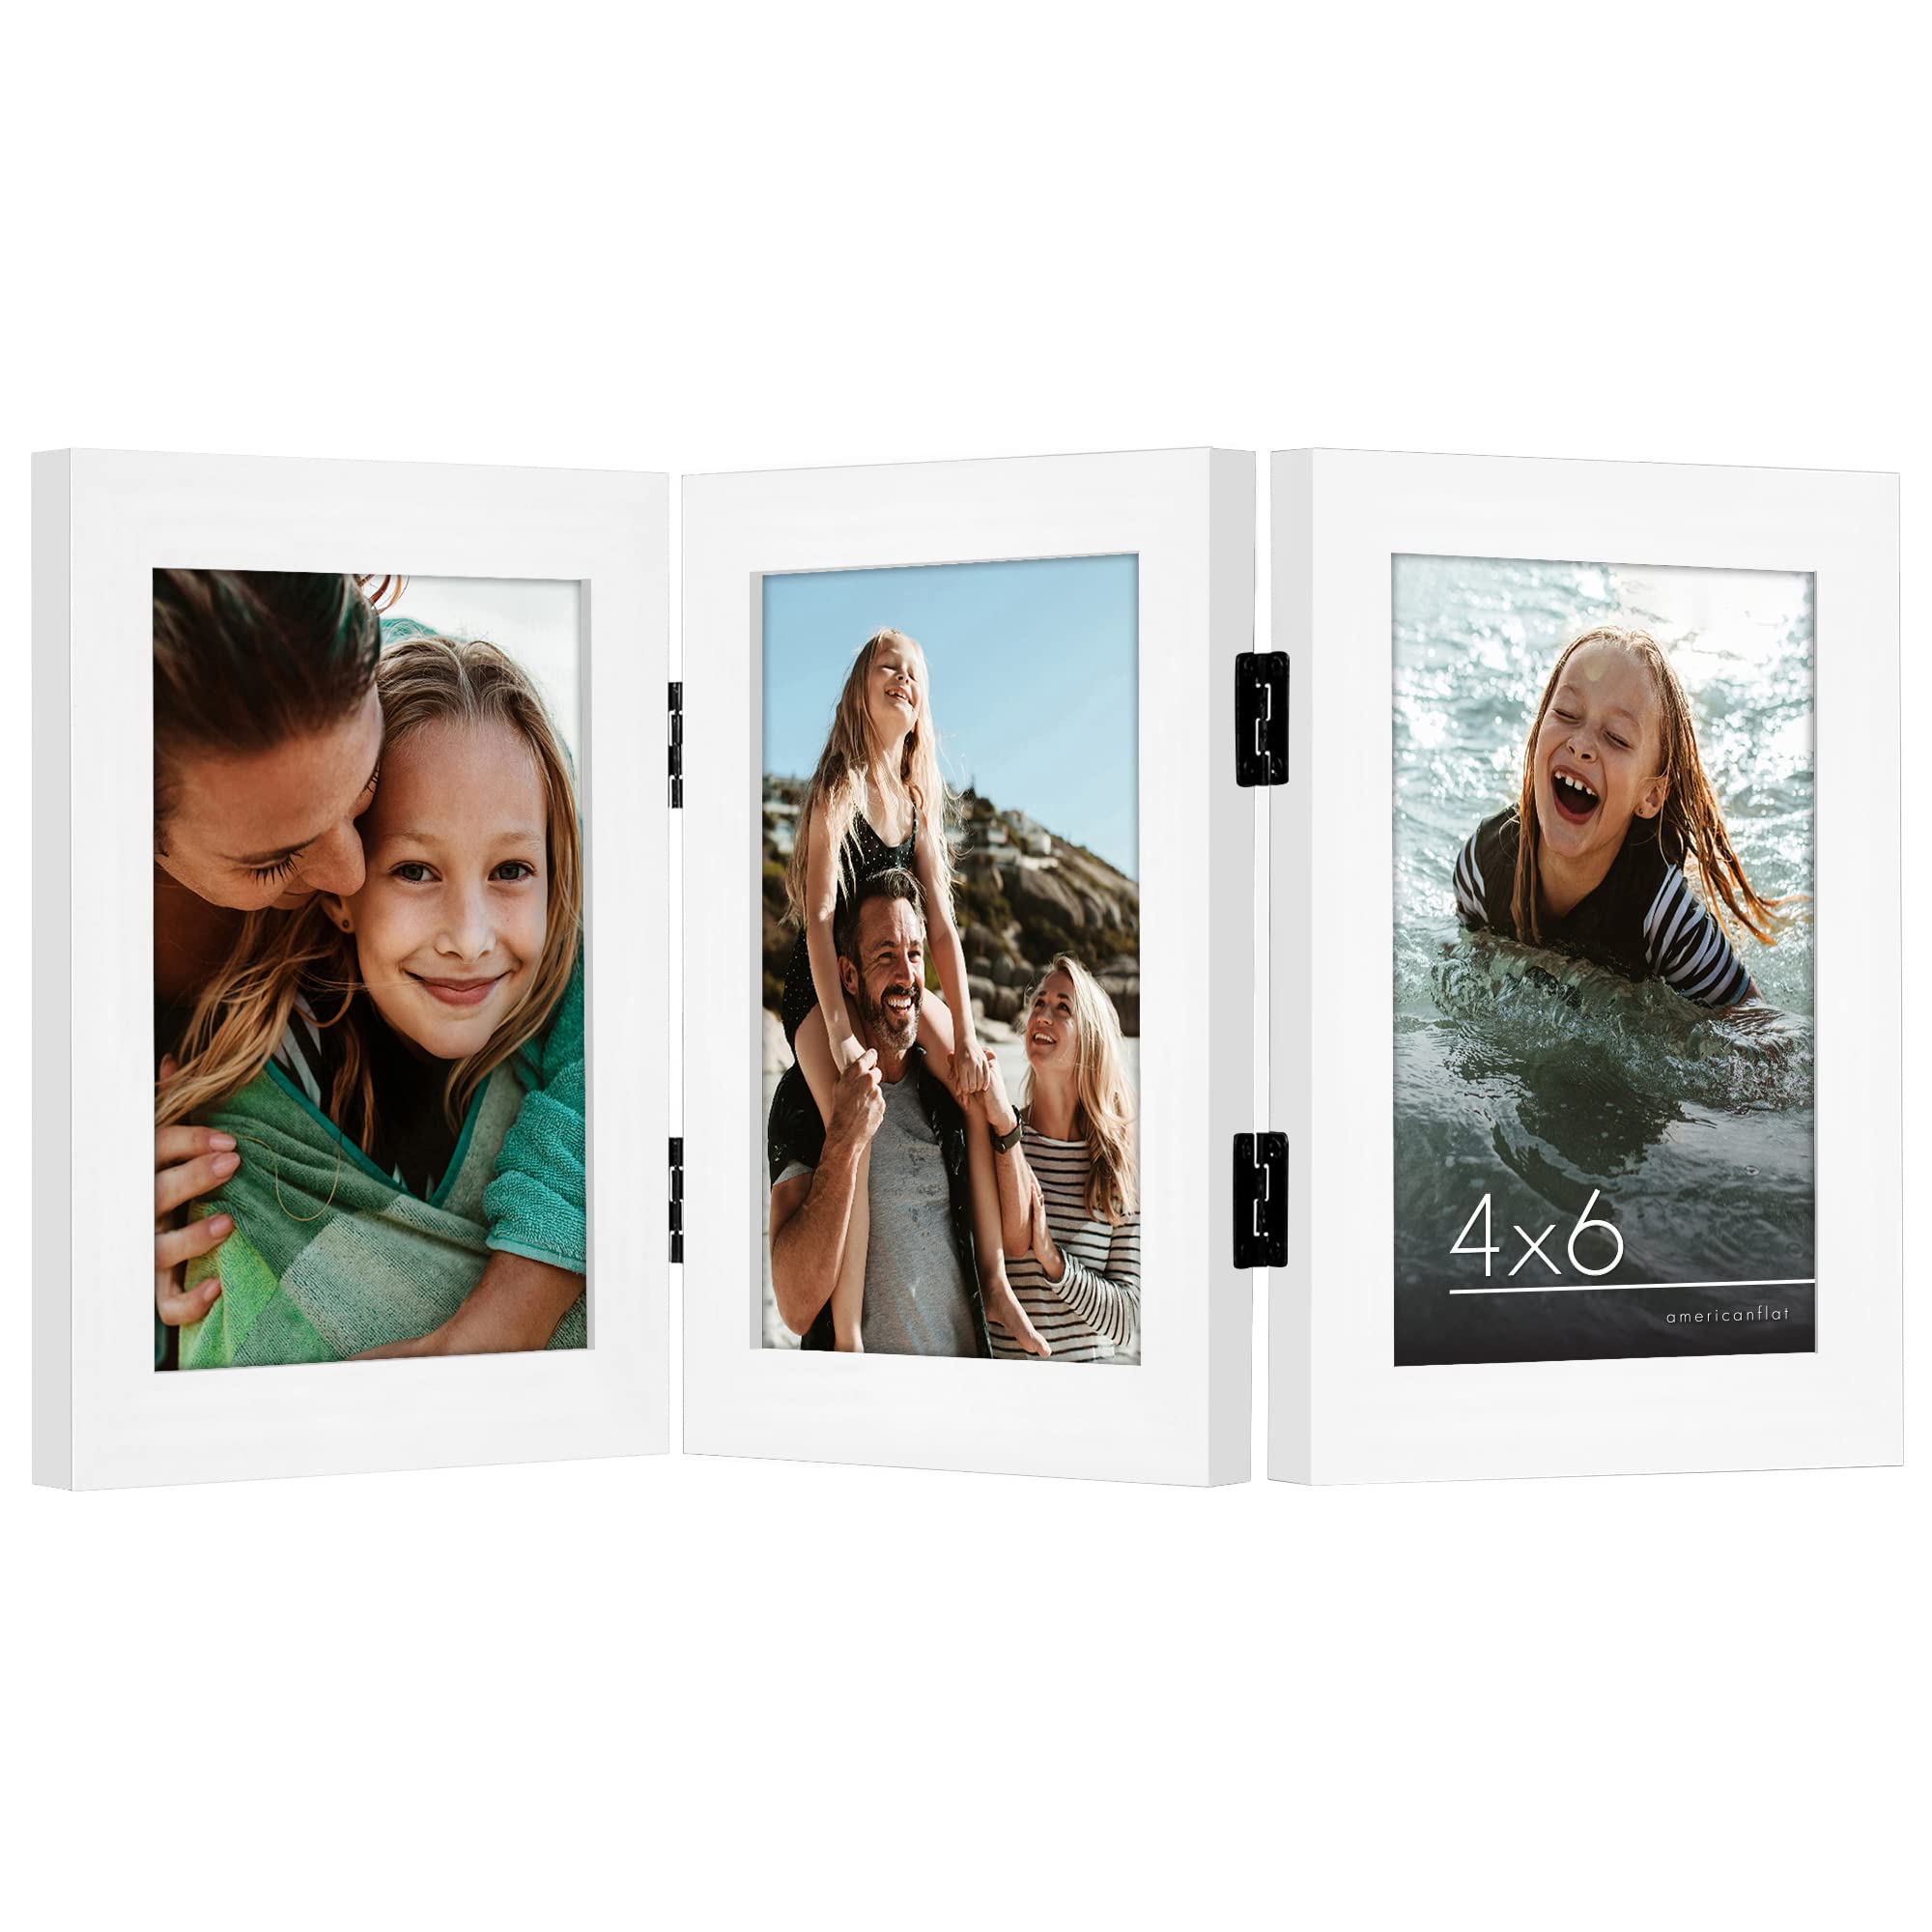 Americanflat Hinged 3 Photo Frame in White MDF - Desk Photo Frame for 4x6 Photos - Tri Folding Picture Frame For Desk - Displays